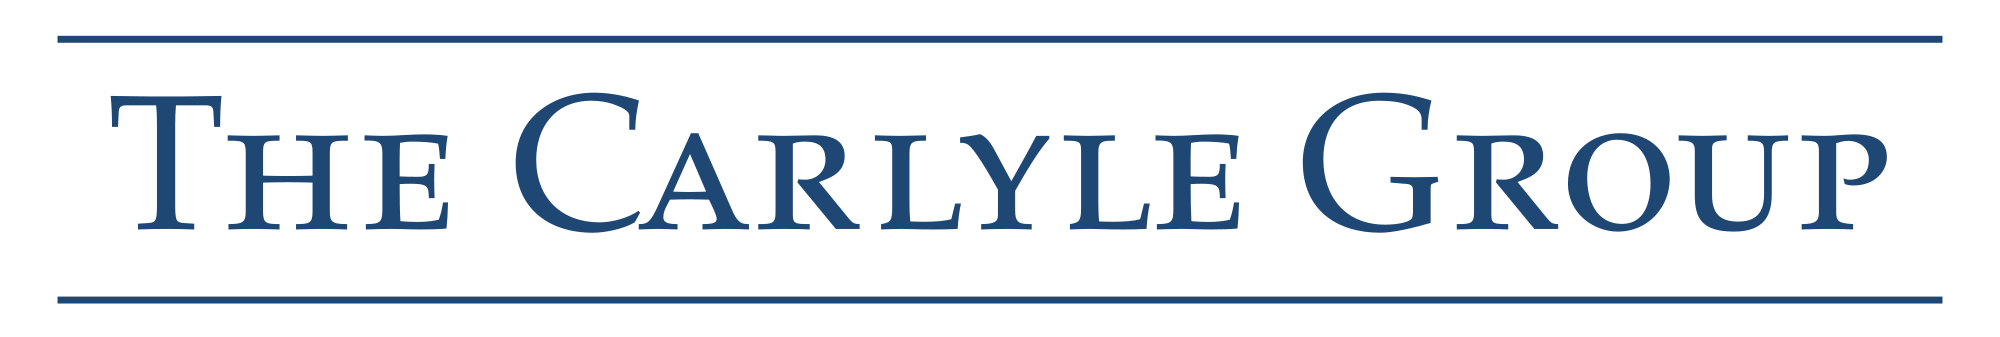 The Carlyle Group logo